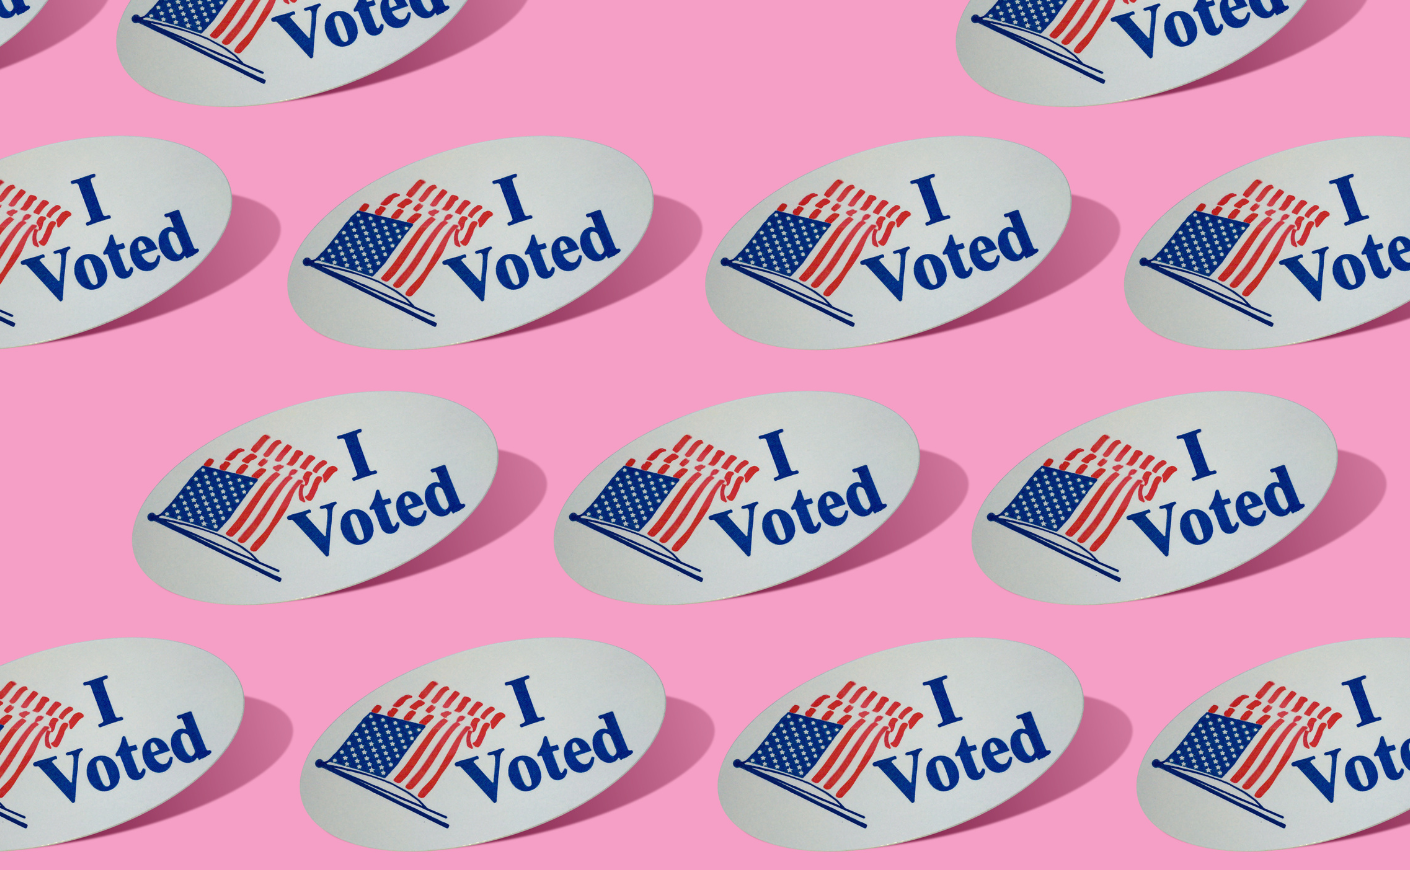 "i voted" stickers